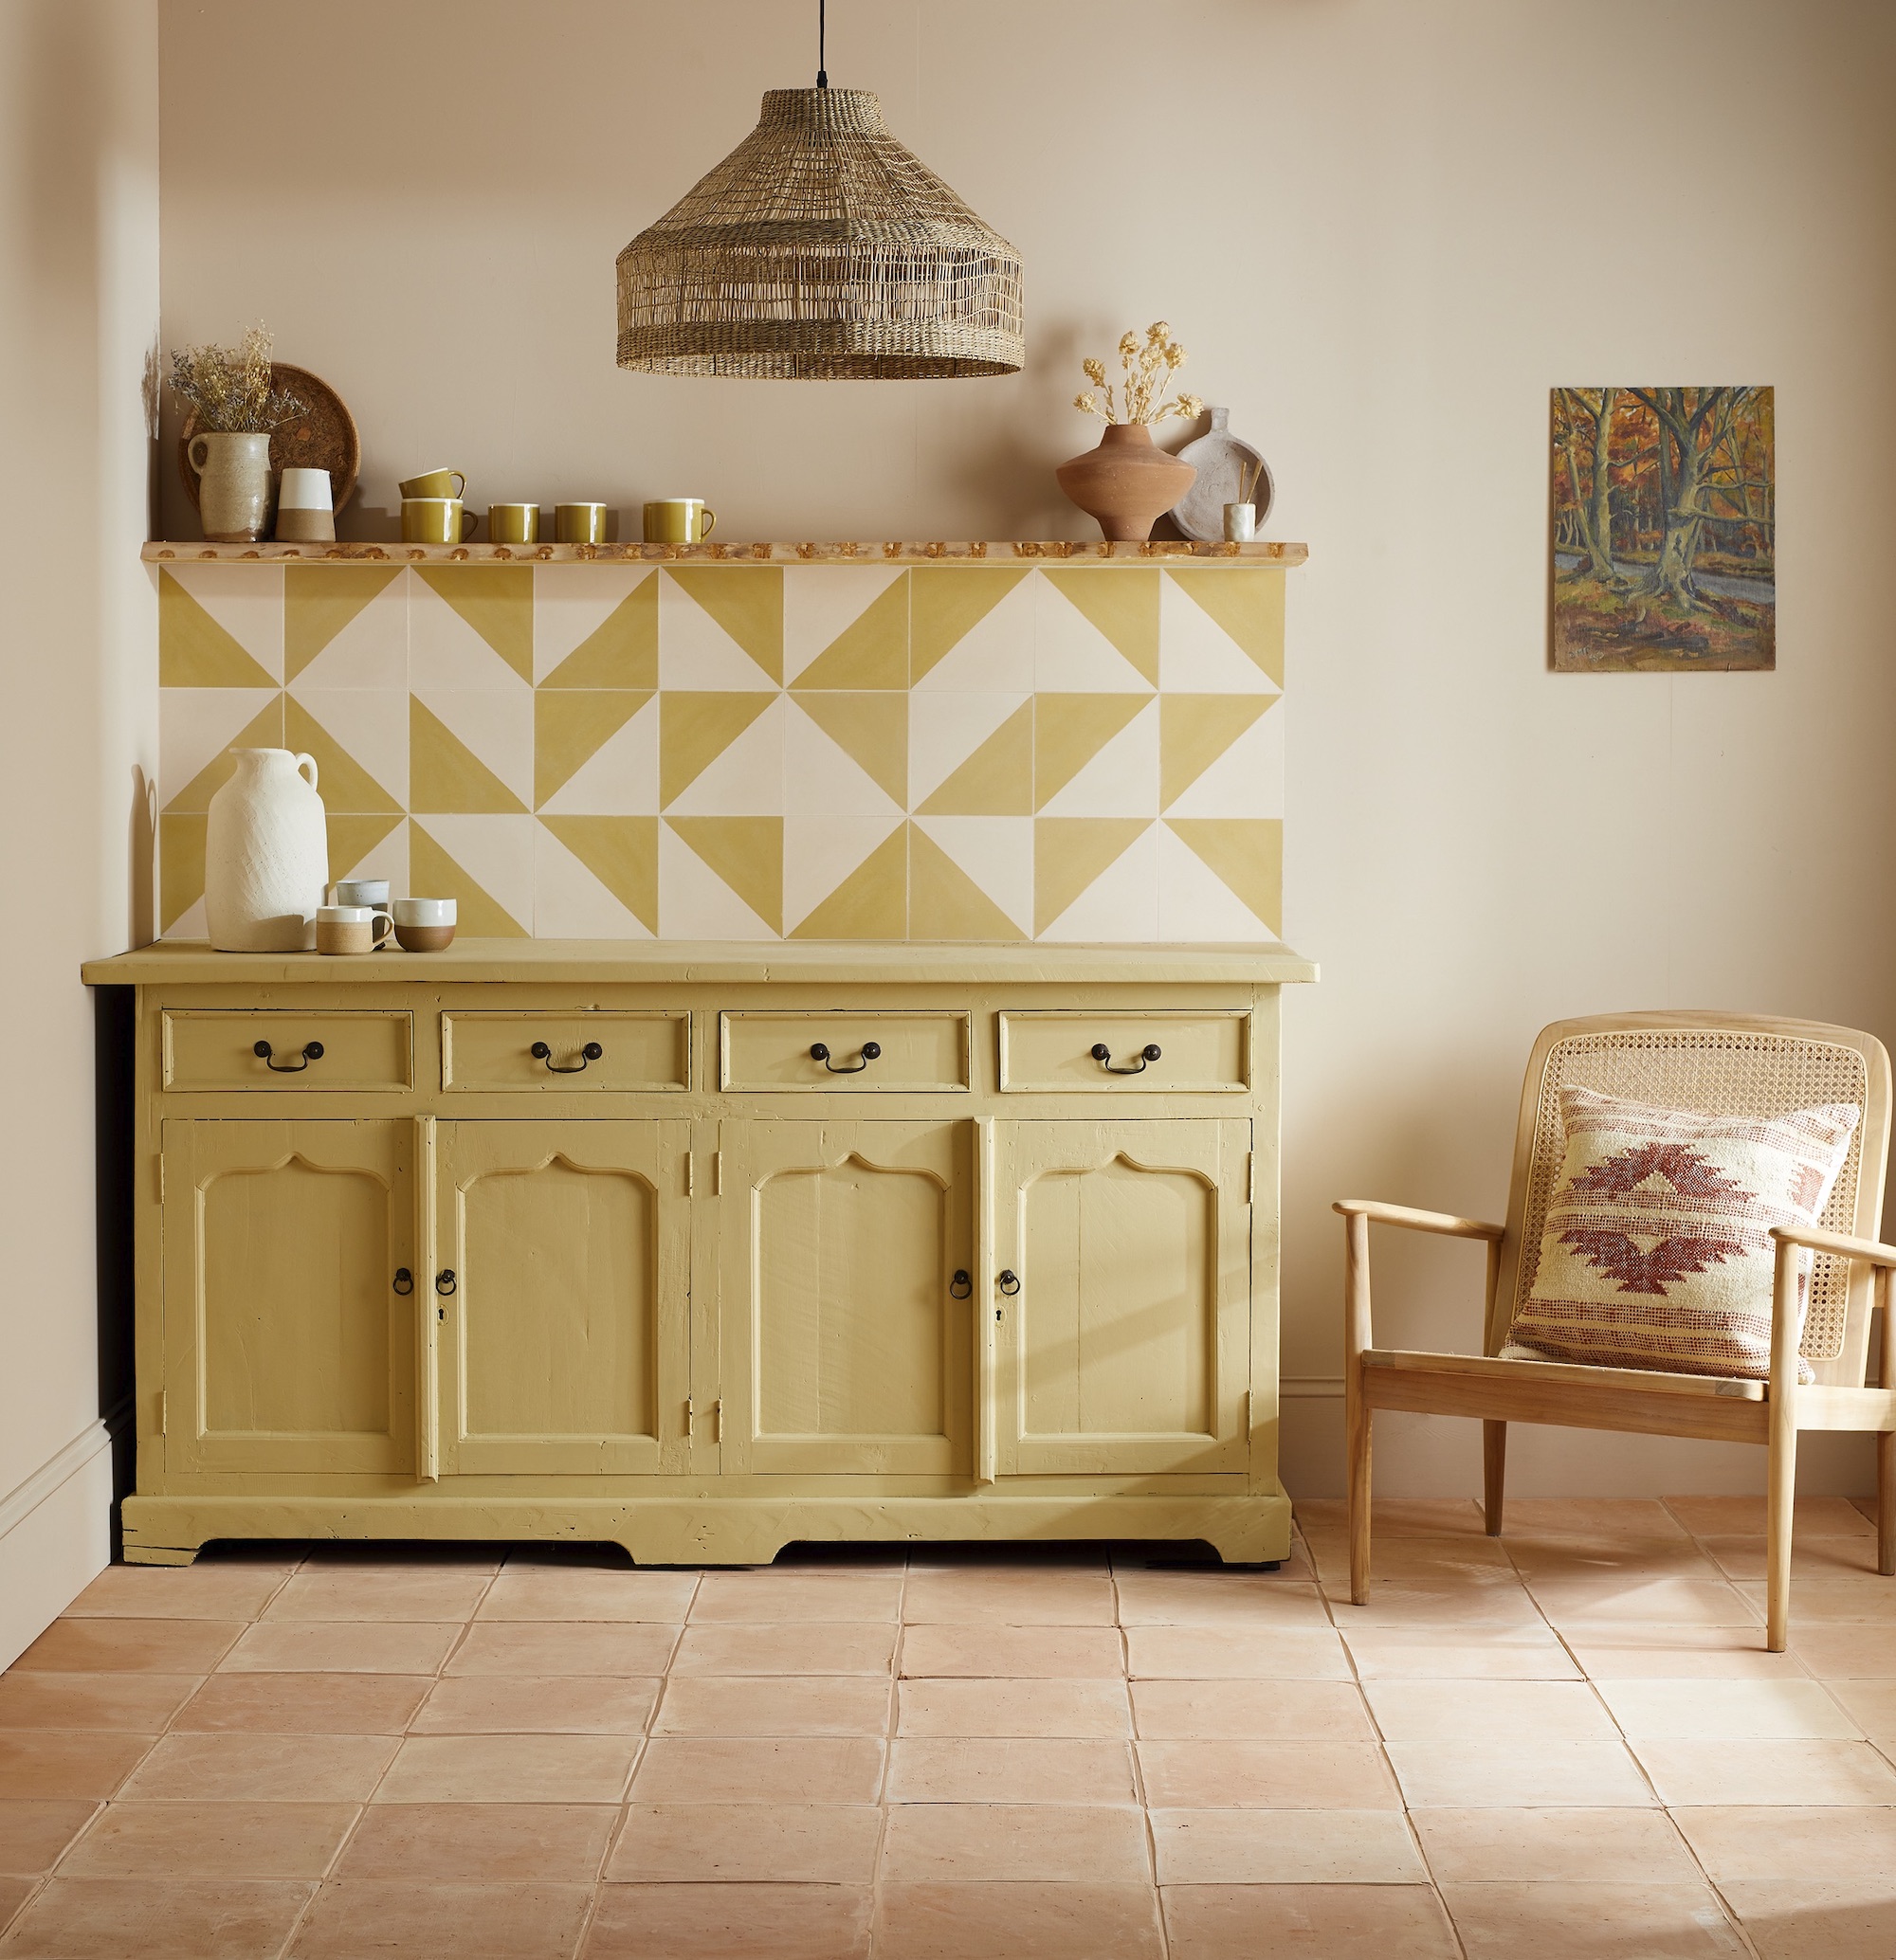 Yellow and terracotta tiles by Bert & May in Effect Magazine